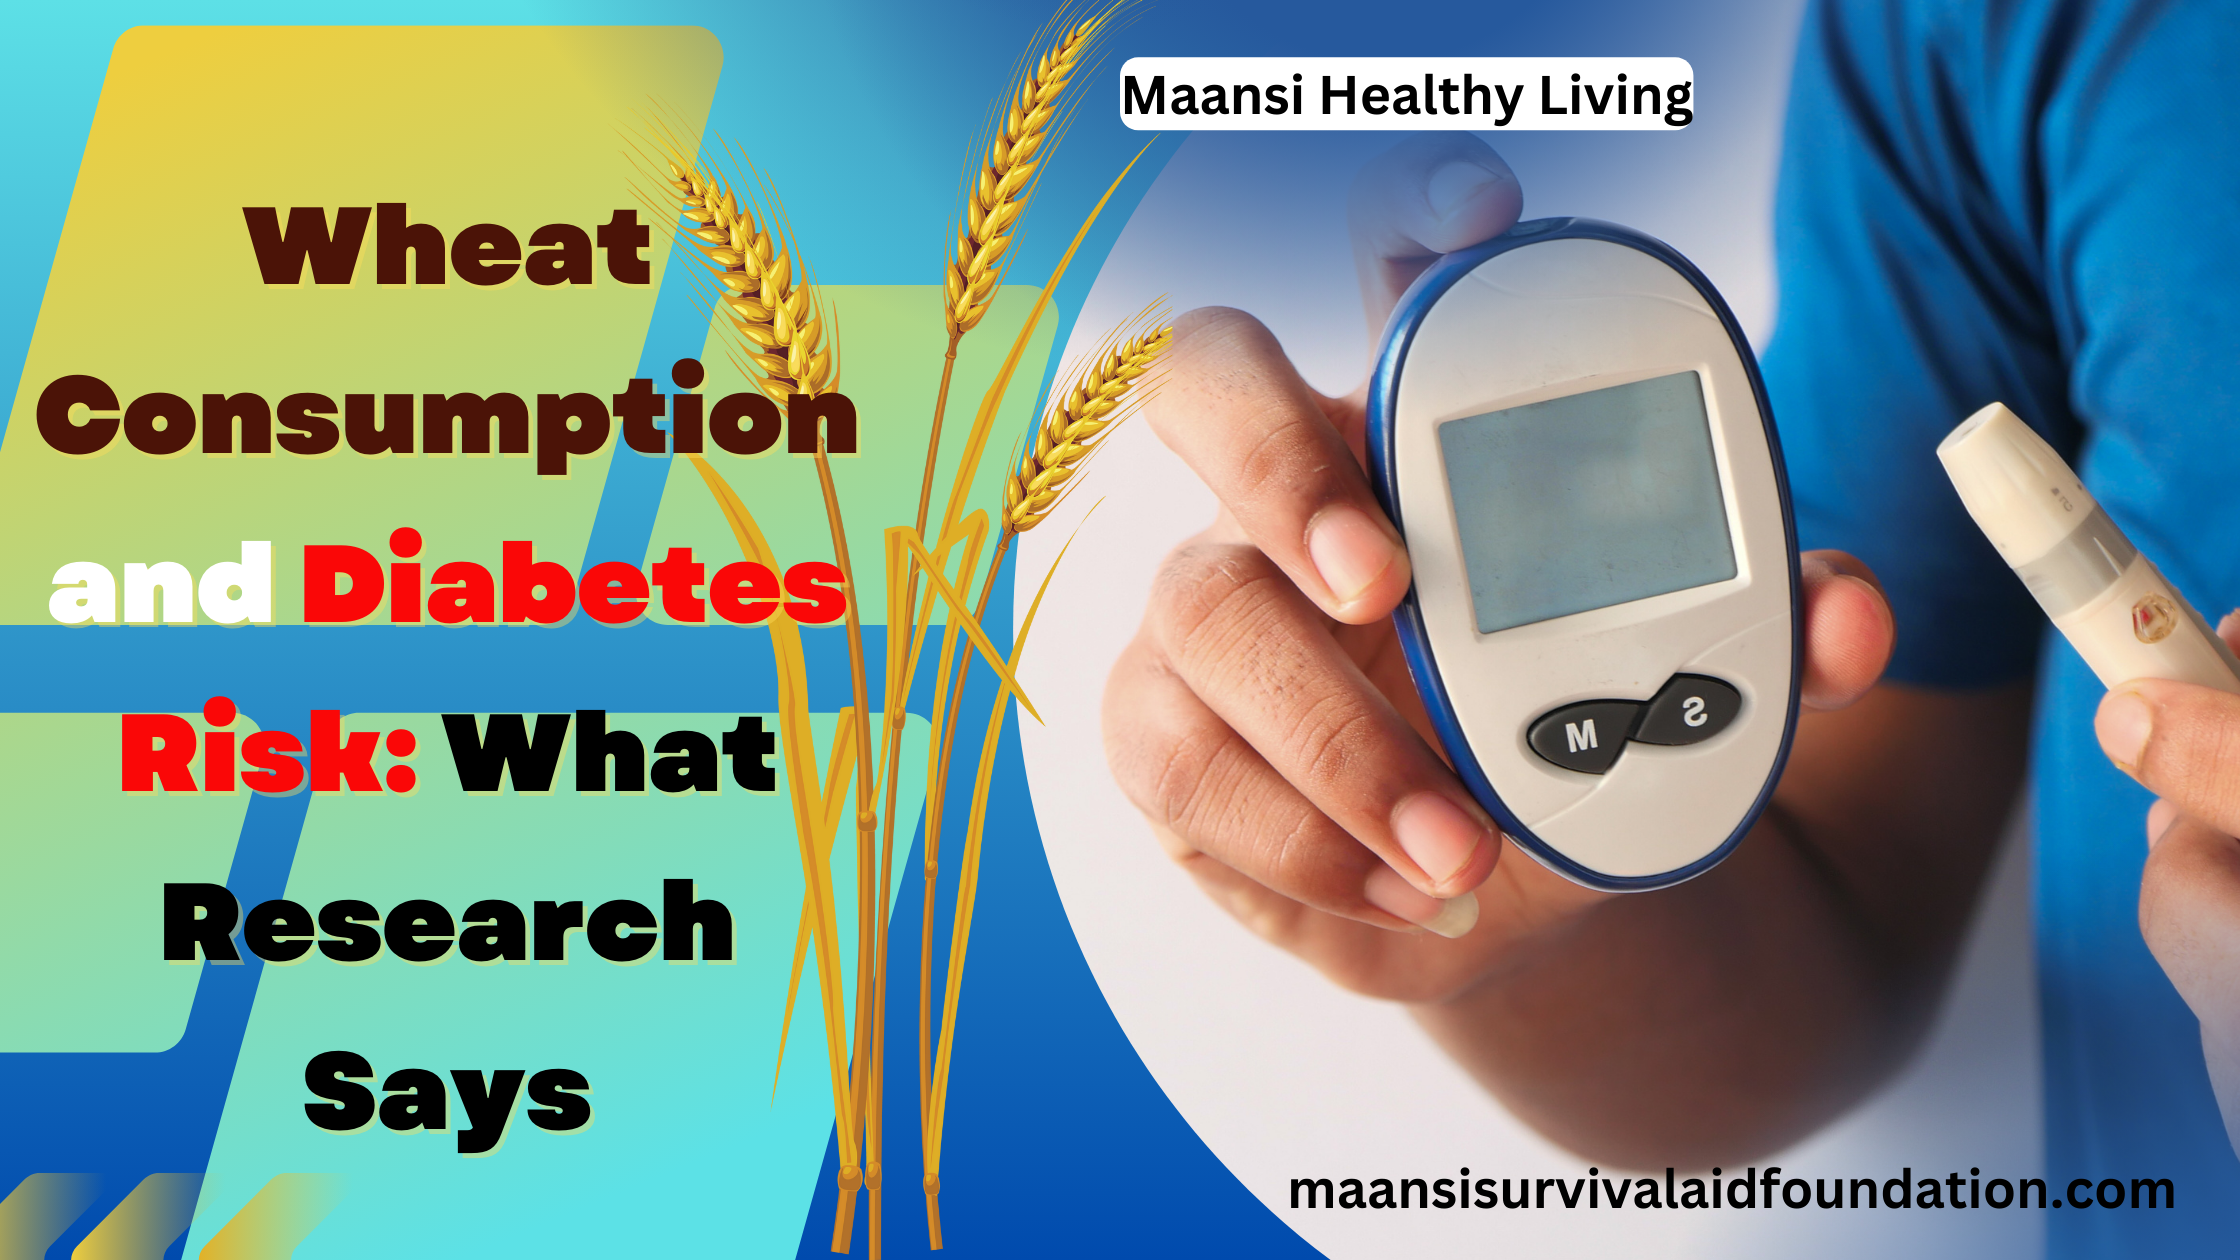 Wheat consumption and diabetes risk: what research says